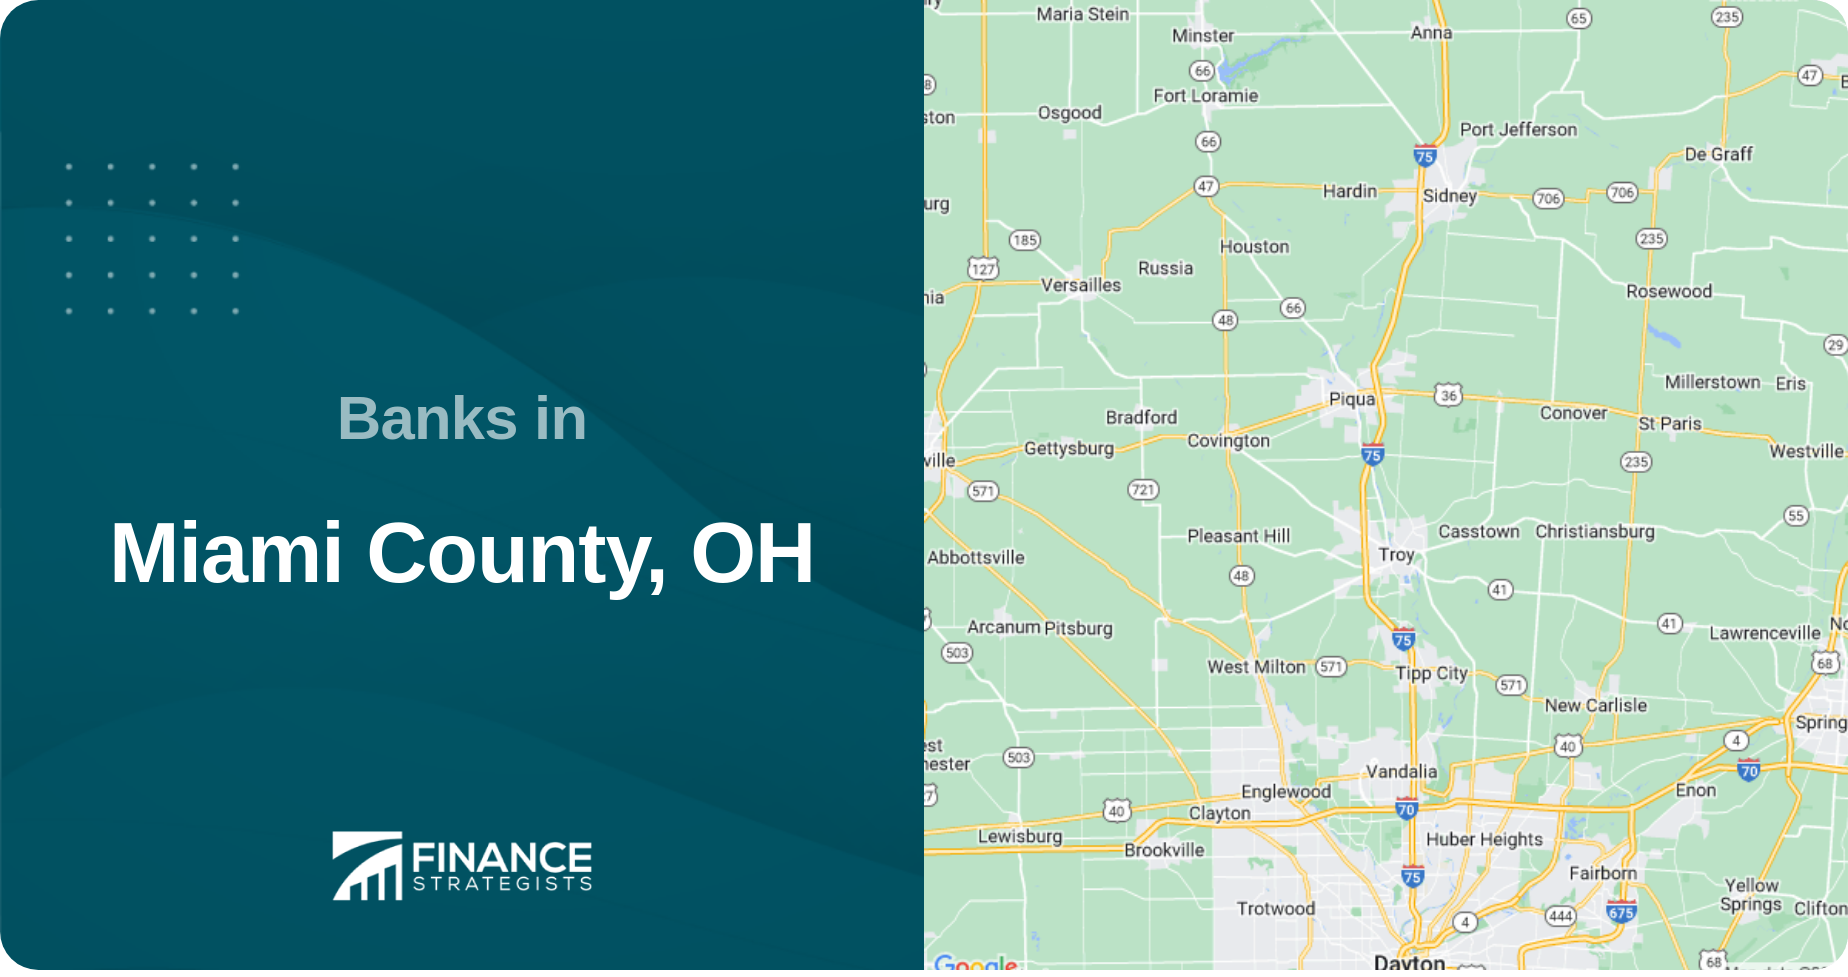 Banks in Miami County, OH